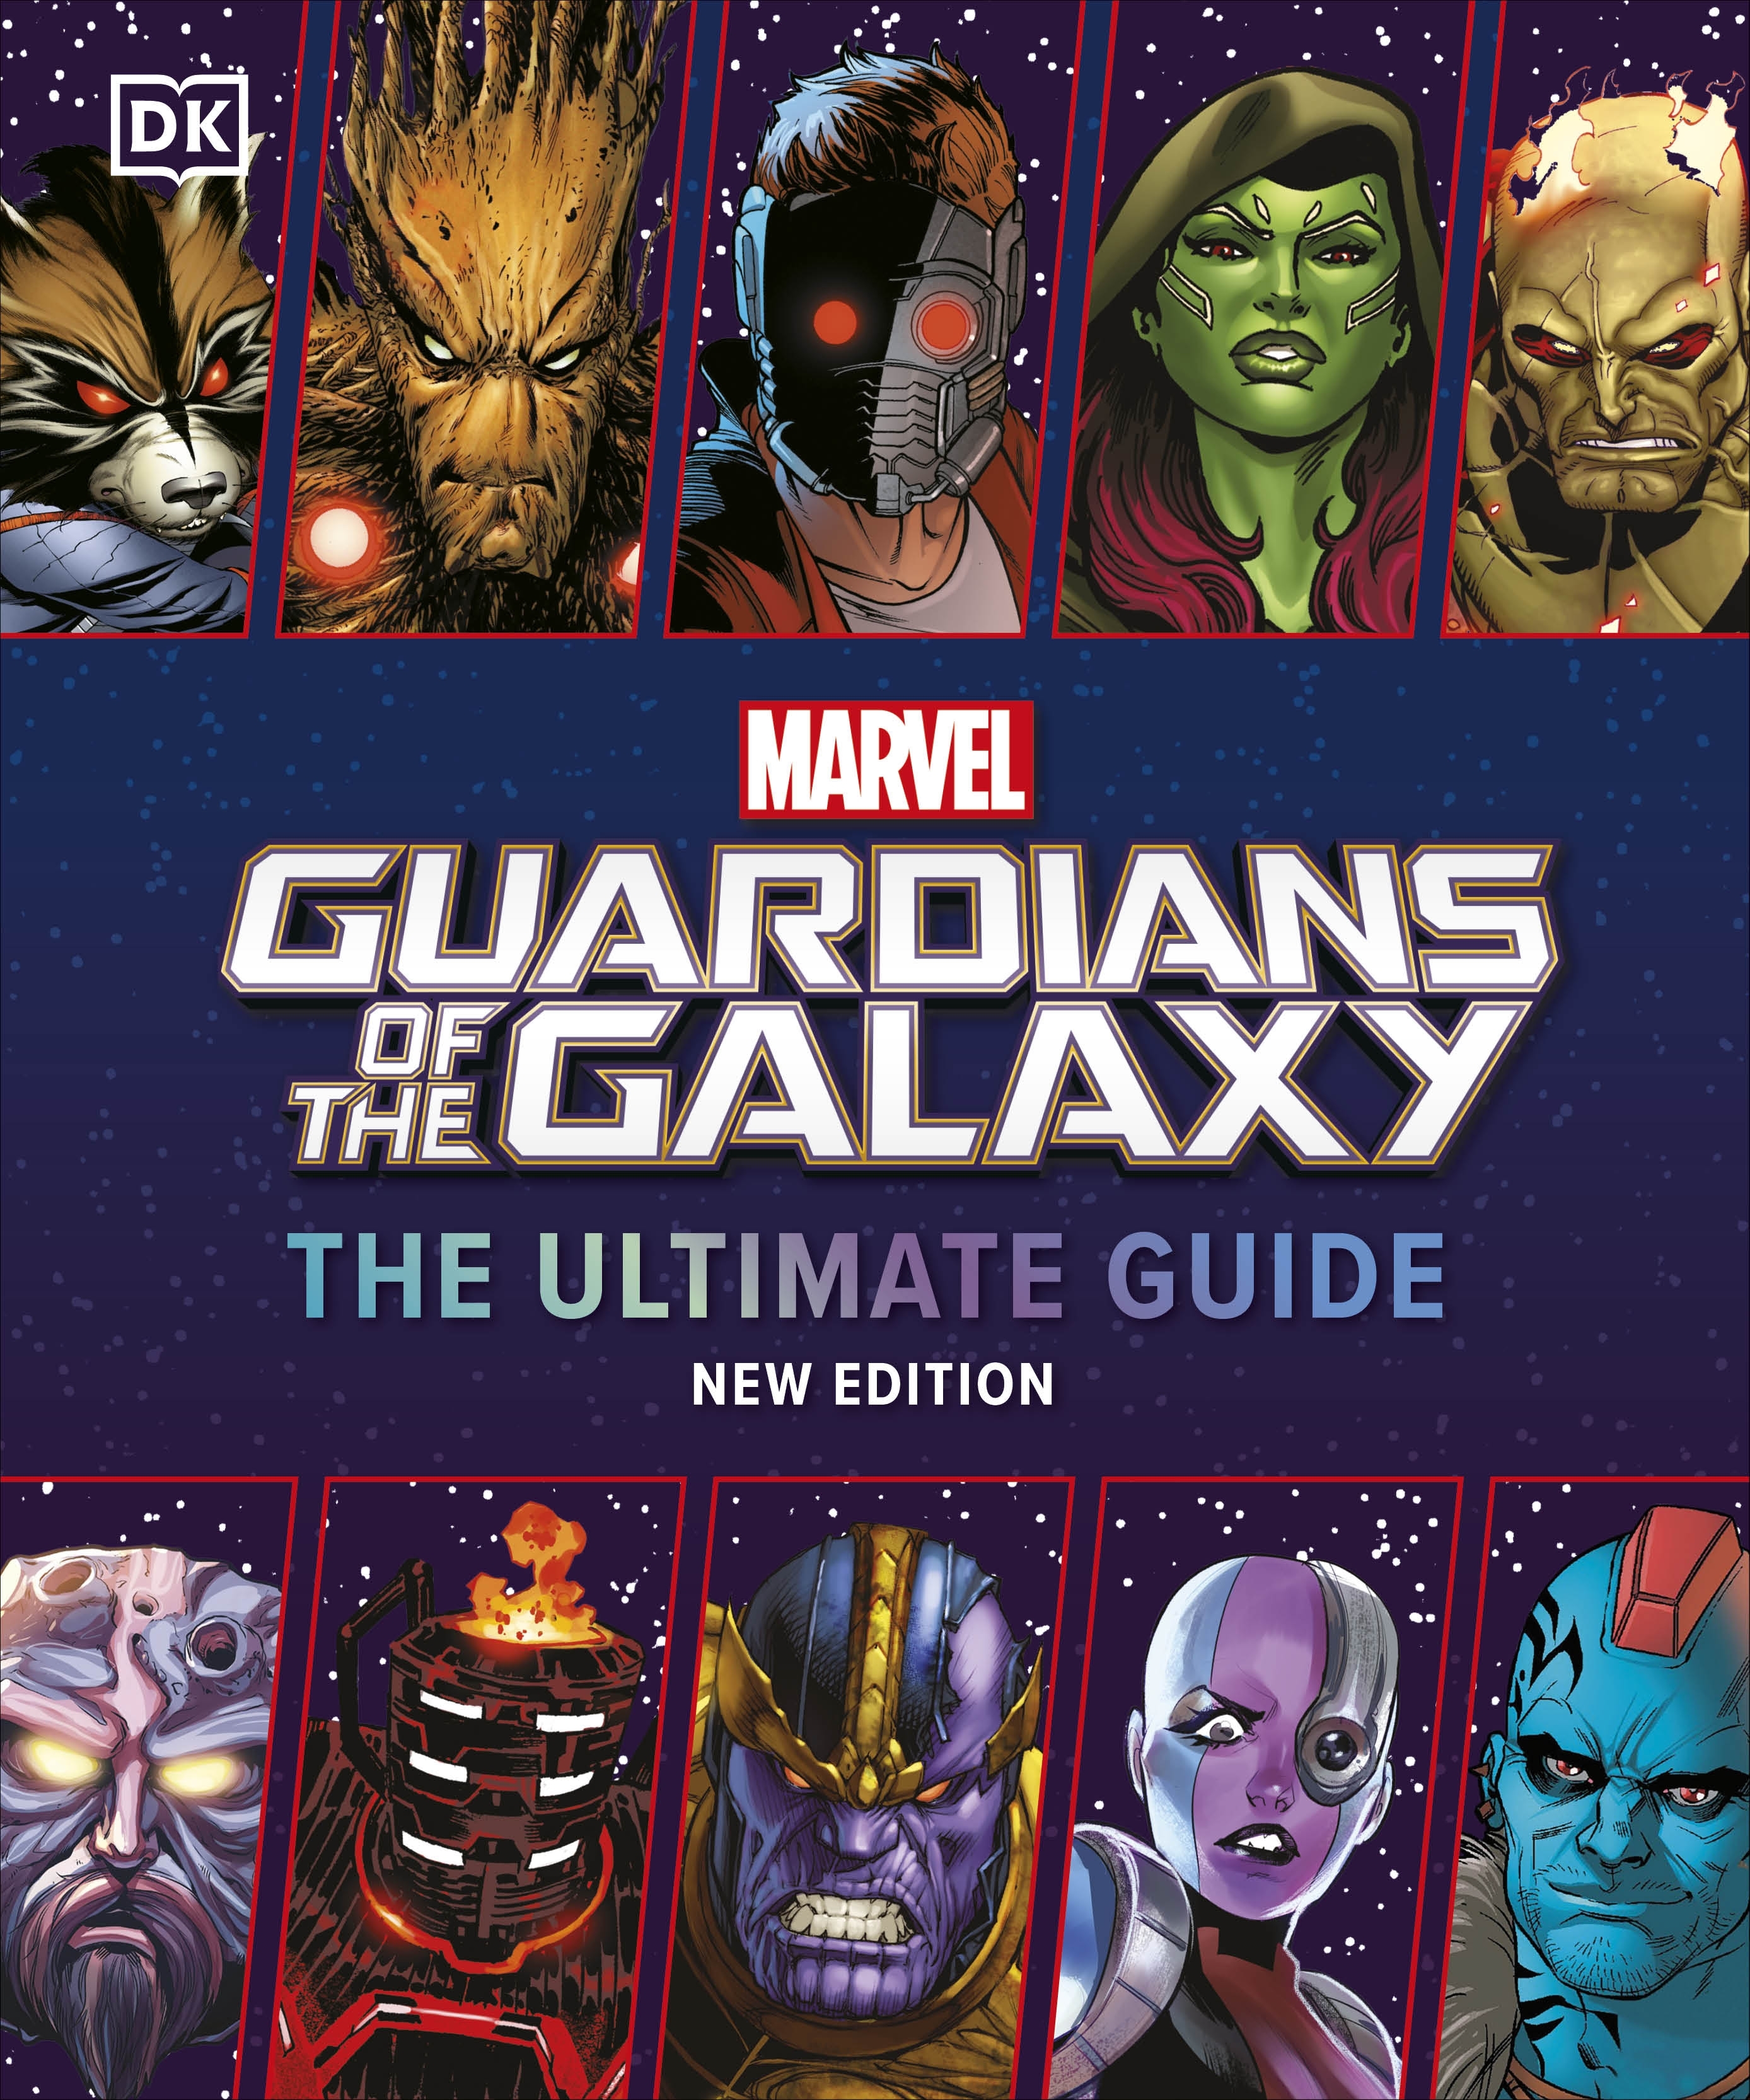 Marvel Guardians of the Galaxy : The Ultimate Guide New Edition